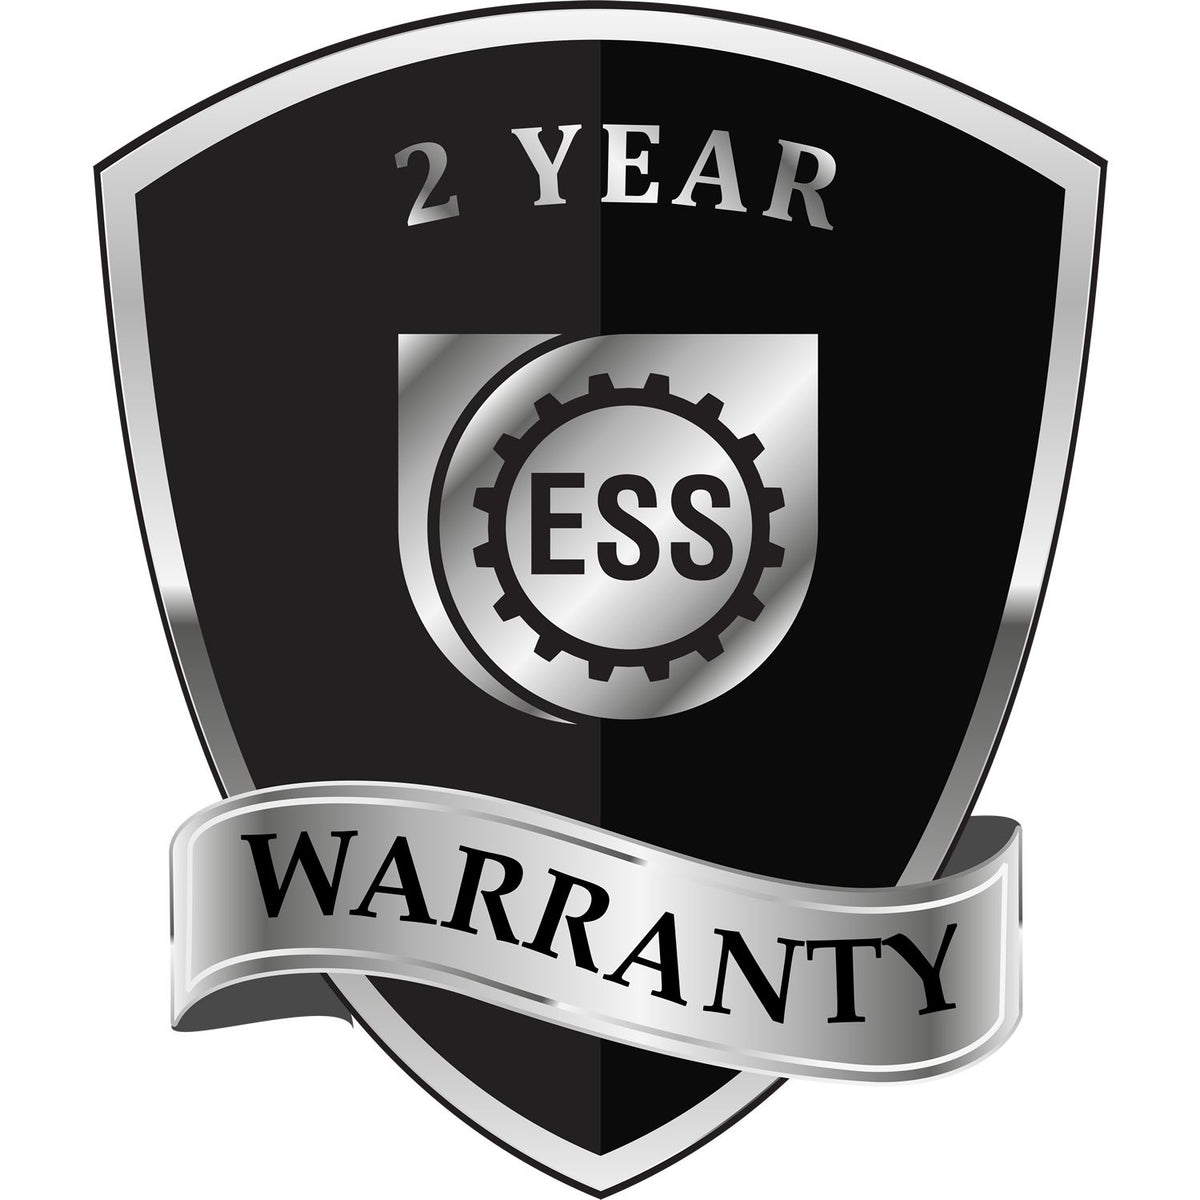 A badge or emblem showing a warranty icon for the Heavy Duty Cast Iron West Virginia Architect Embosser